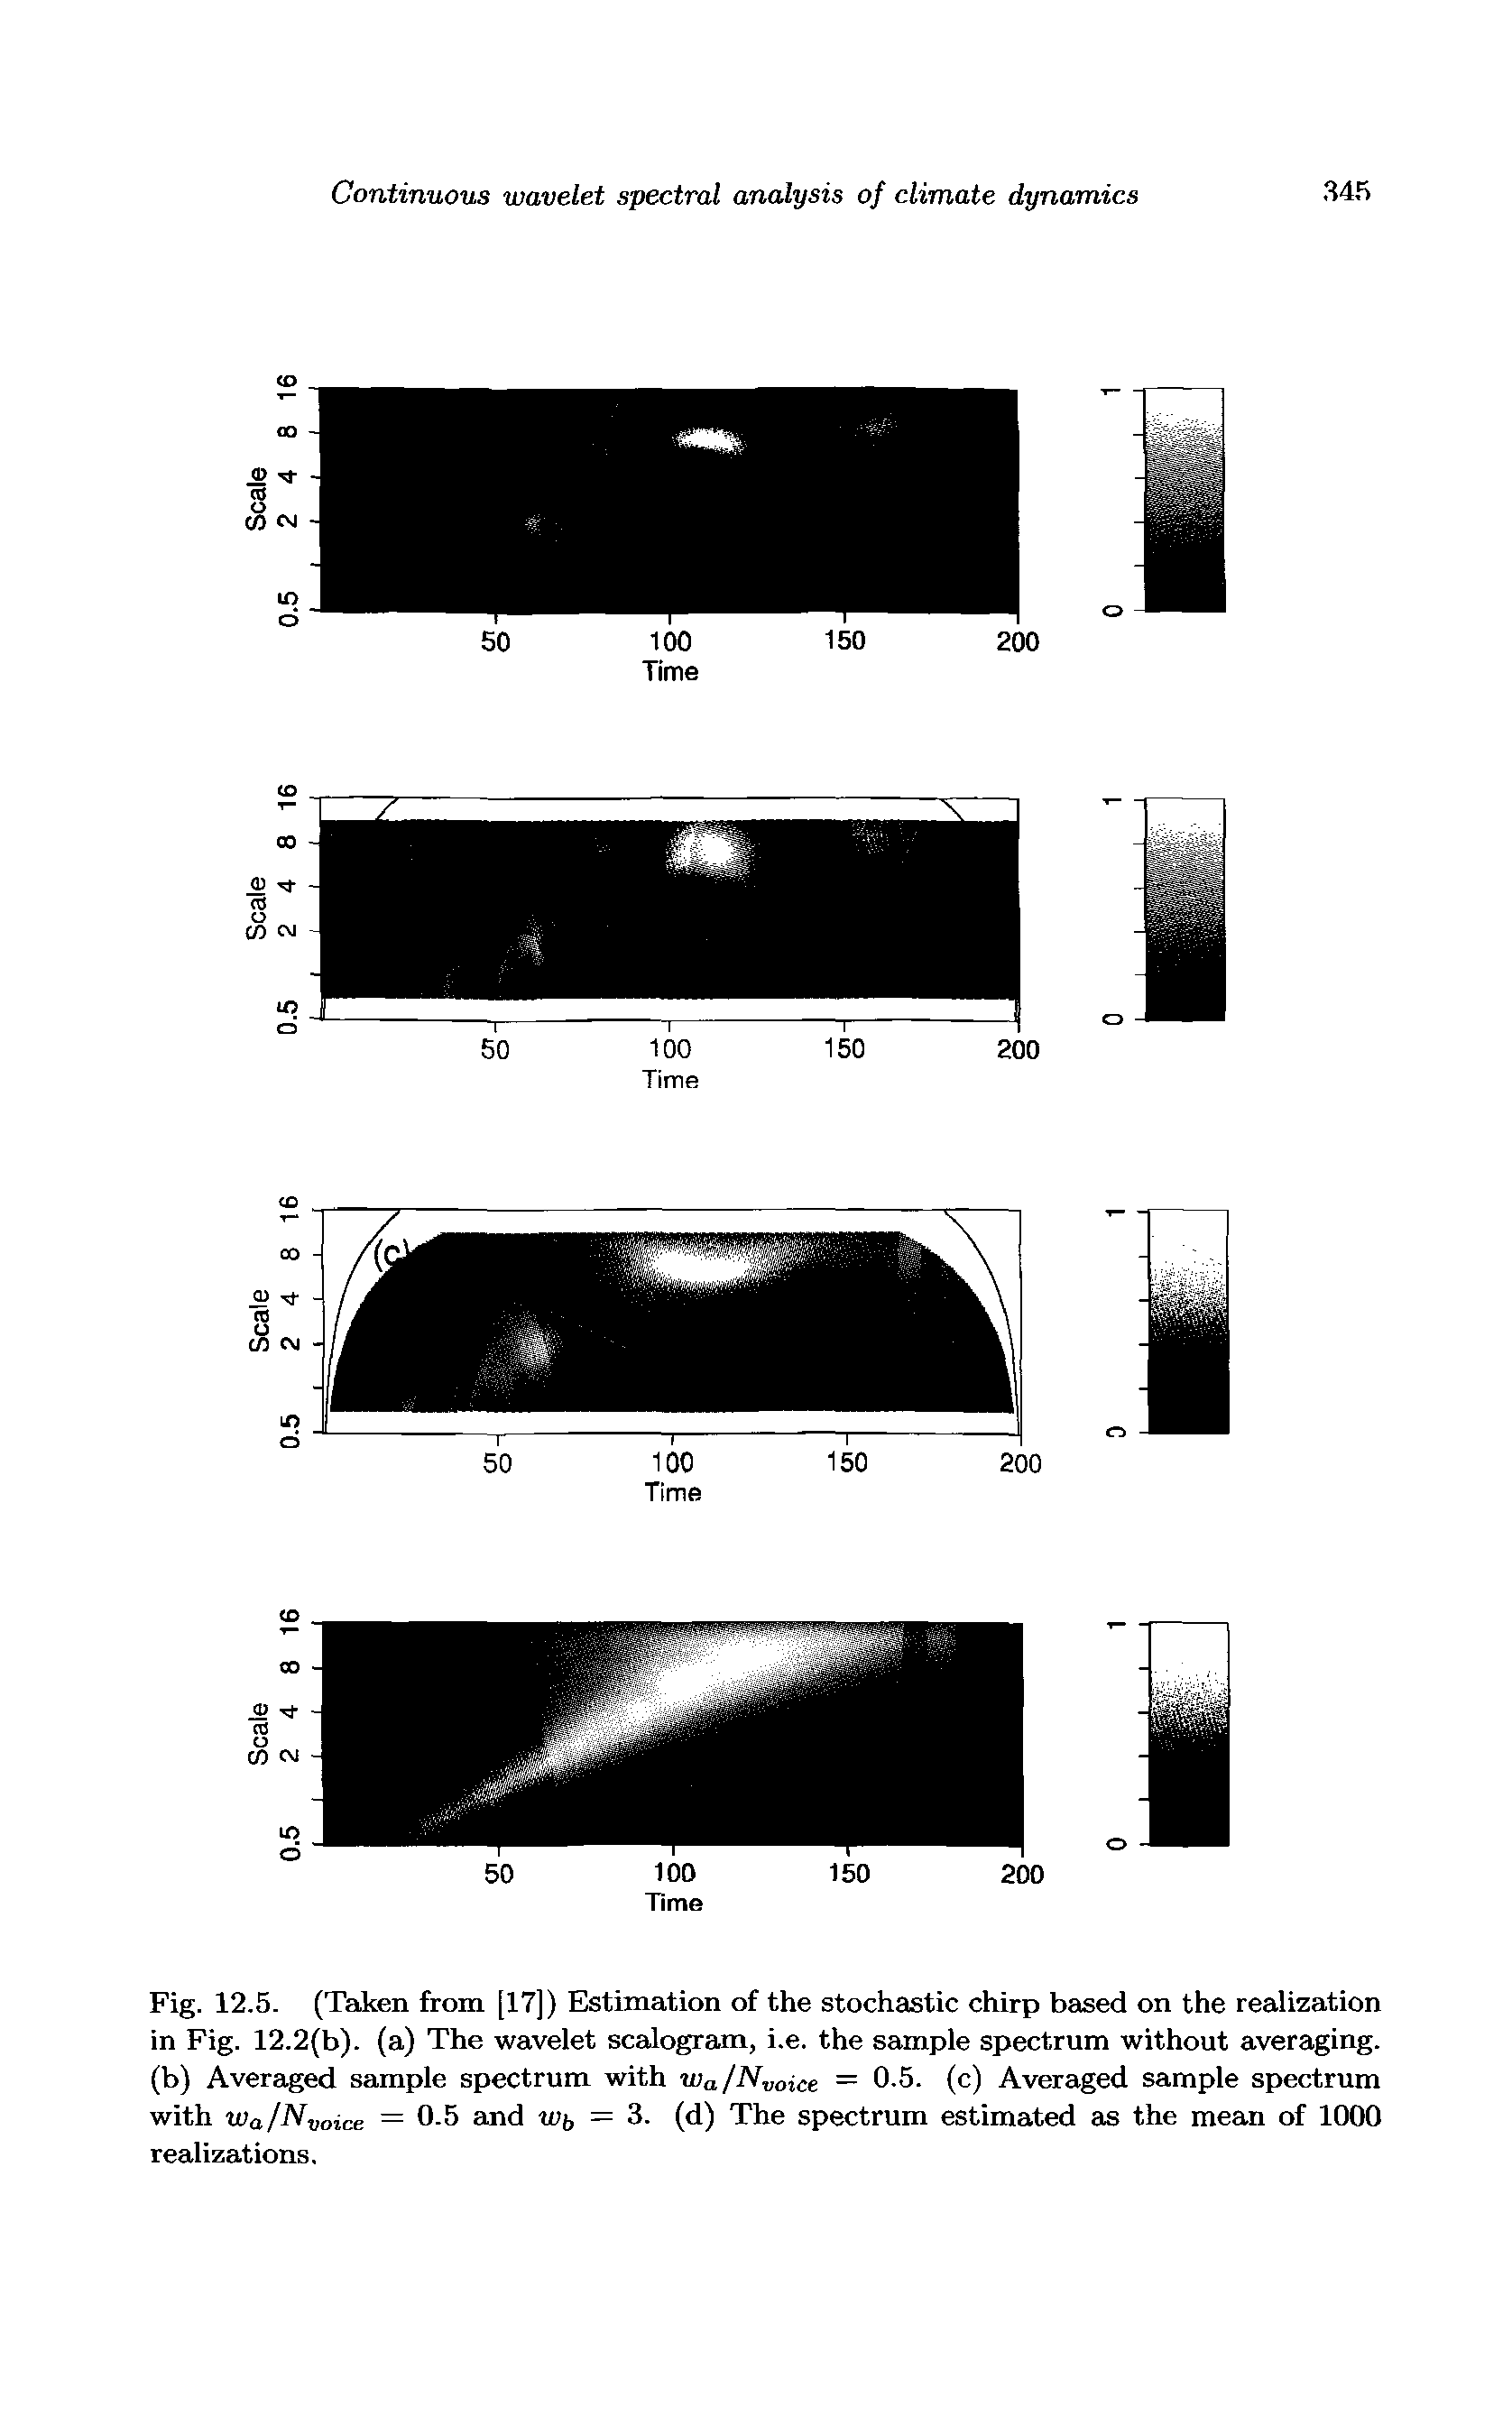 Fig. 12.5. (Taken from [17]) Estimation of the stochastic chirp based on the realization in Fig. 12.2(b). (a) The wavelet scalogram, i.e. the sample spectrum without averaging, (b) Averaged sample spectrum with Wa/Nyoice = 0-5. (c) Averaged sample spectrum with Wa/Nyoice = 0.5 and W), = 3. (d) The spectrum estimated as the mean of 1000 realizations.